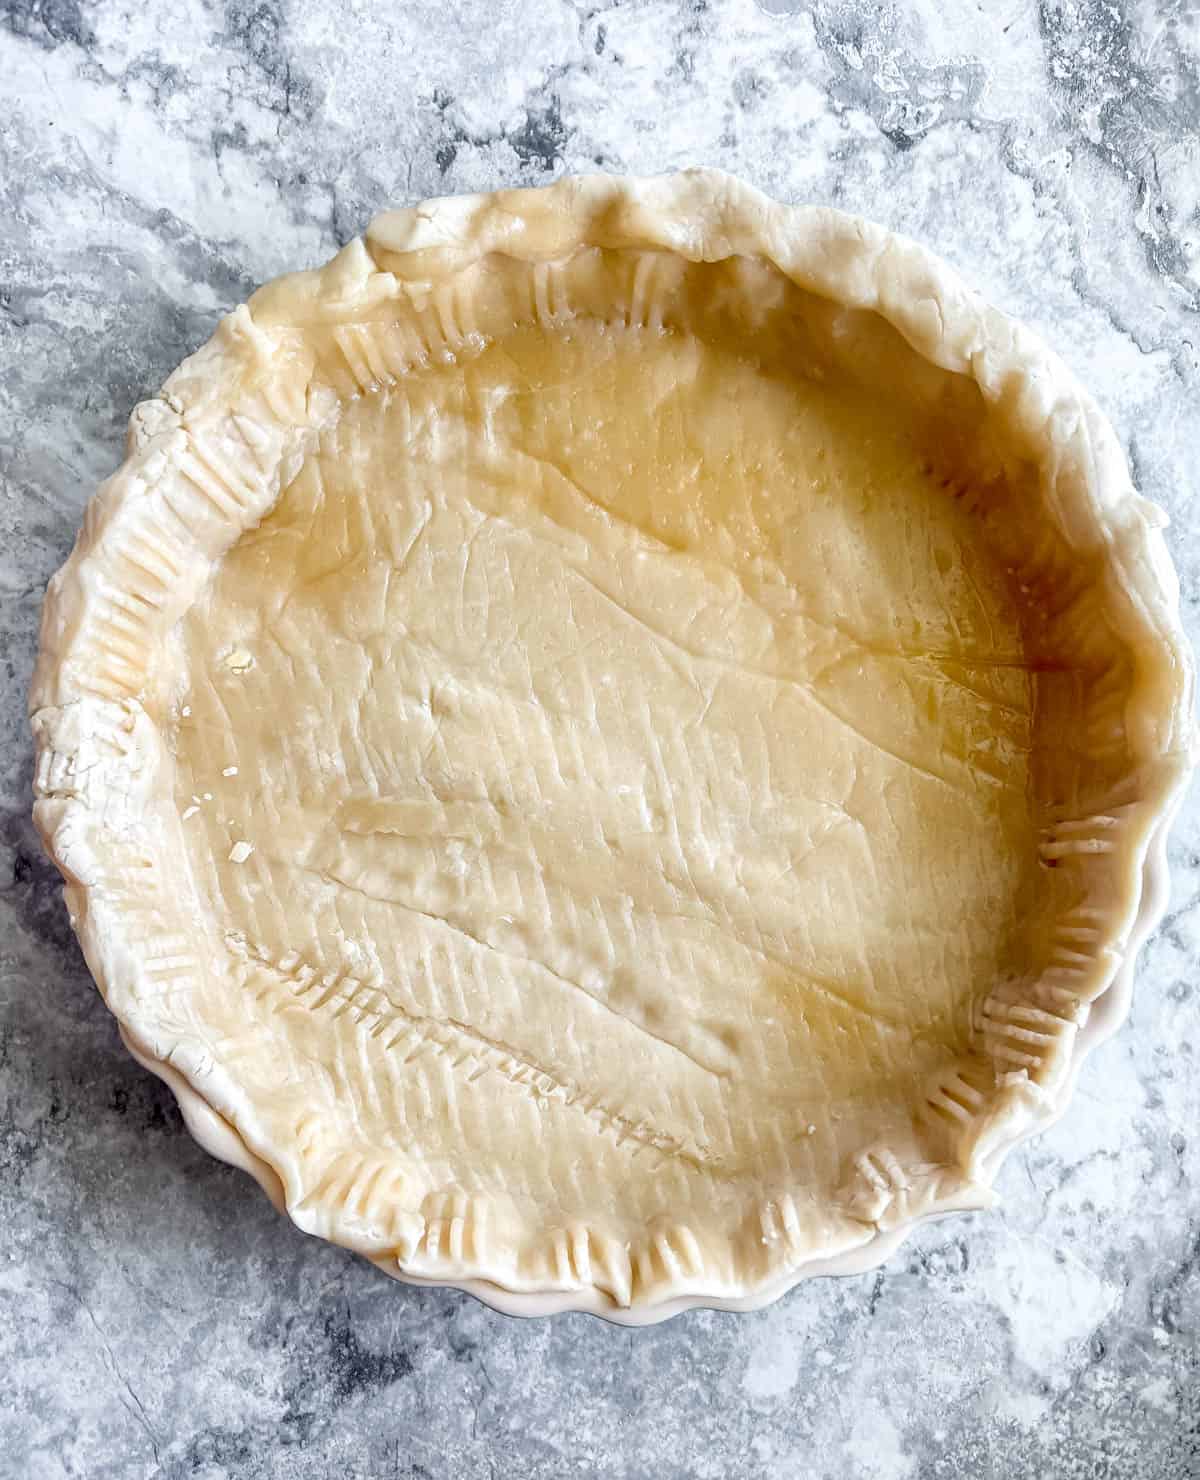 Store bought pie crust added to the pan.